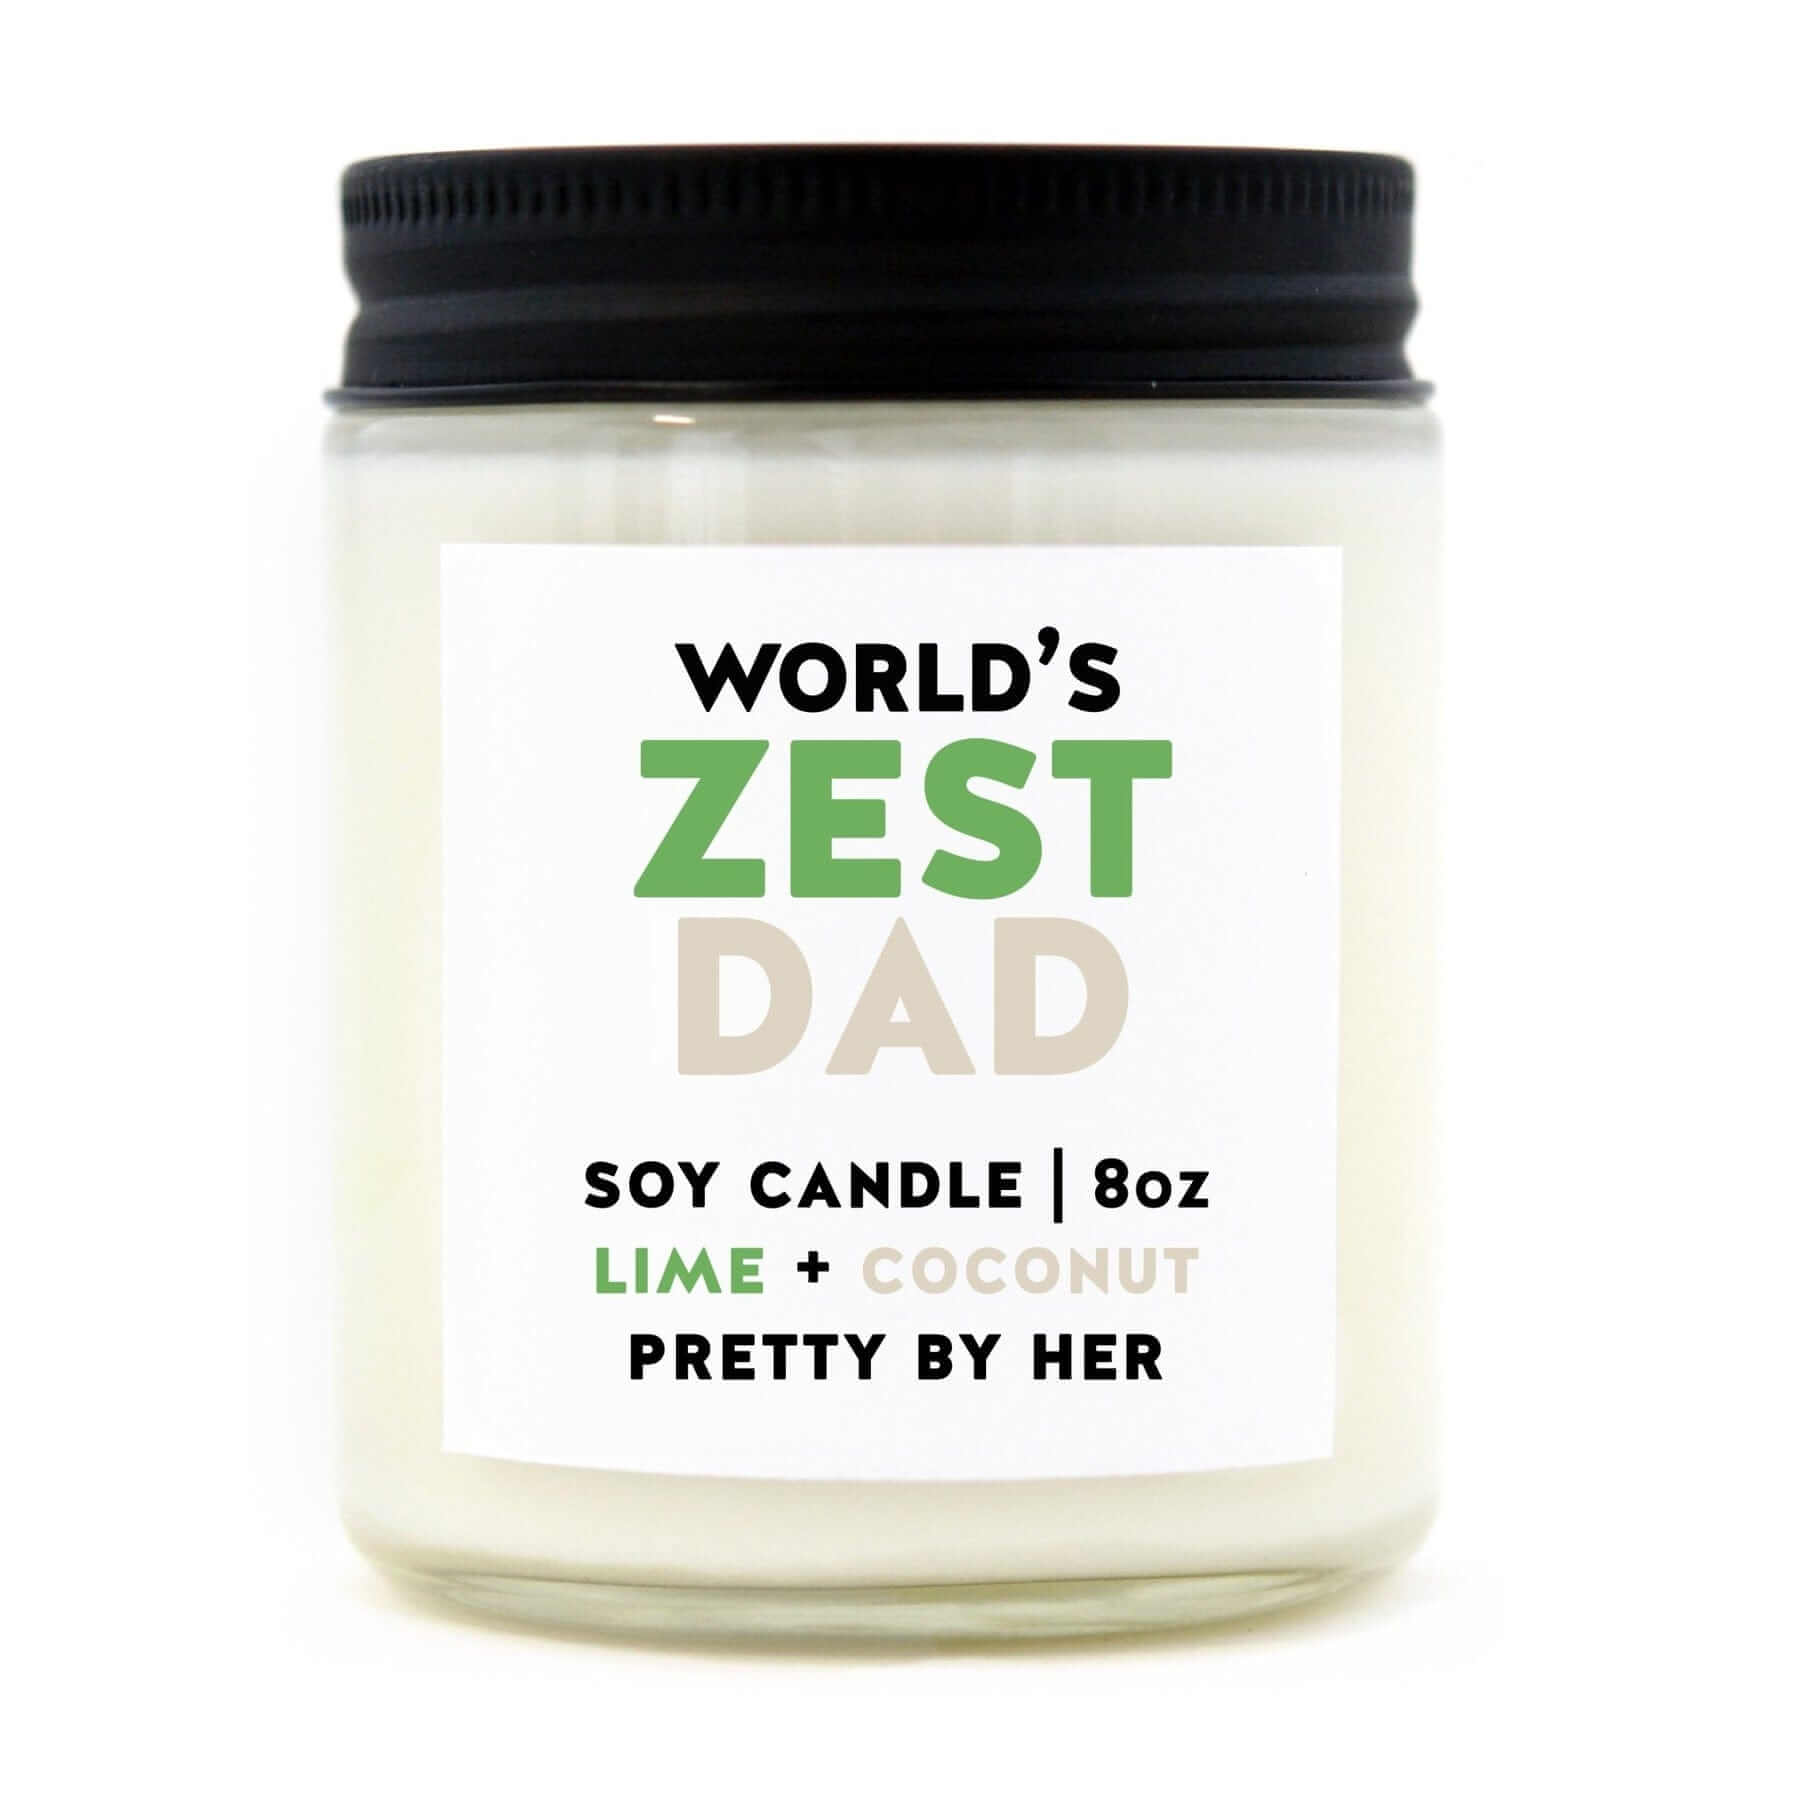 PRETTY BY HER Candles Pretty By Her, World's Zest Dad, Soy Candle, made in Canada